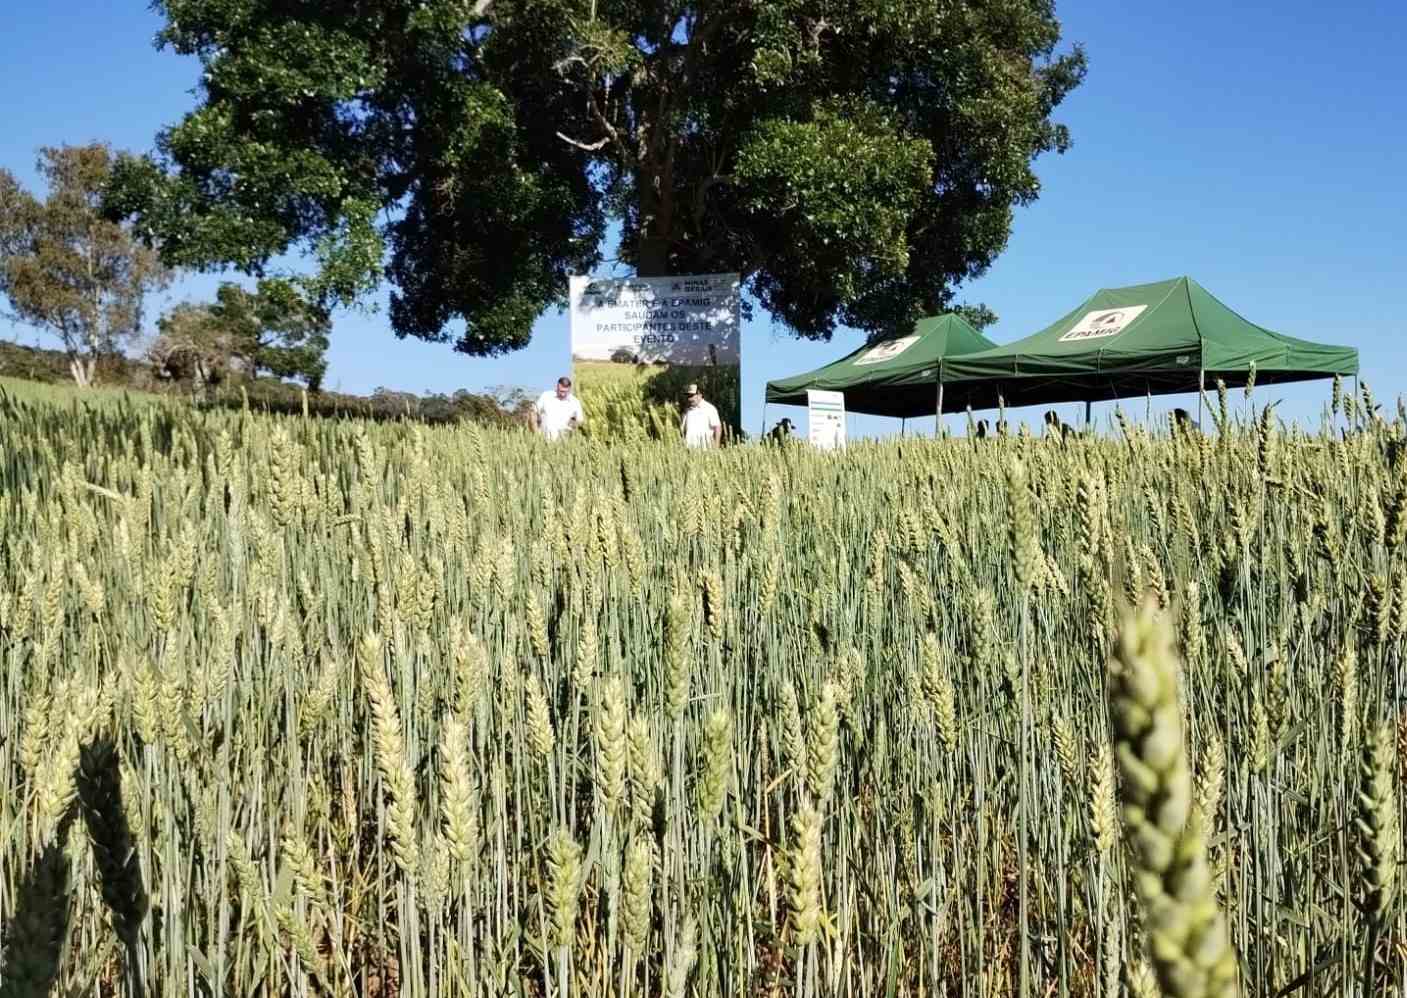 Wheat may be a cheaper alternative to corn silage